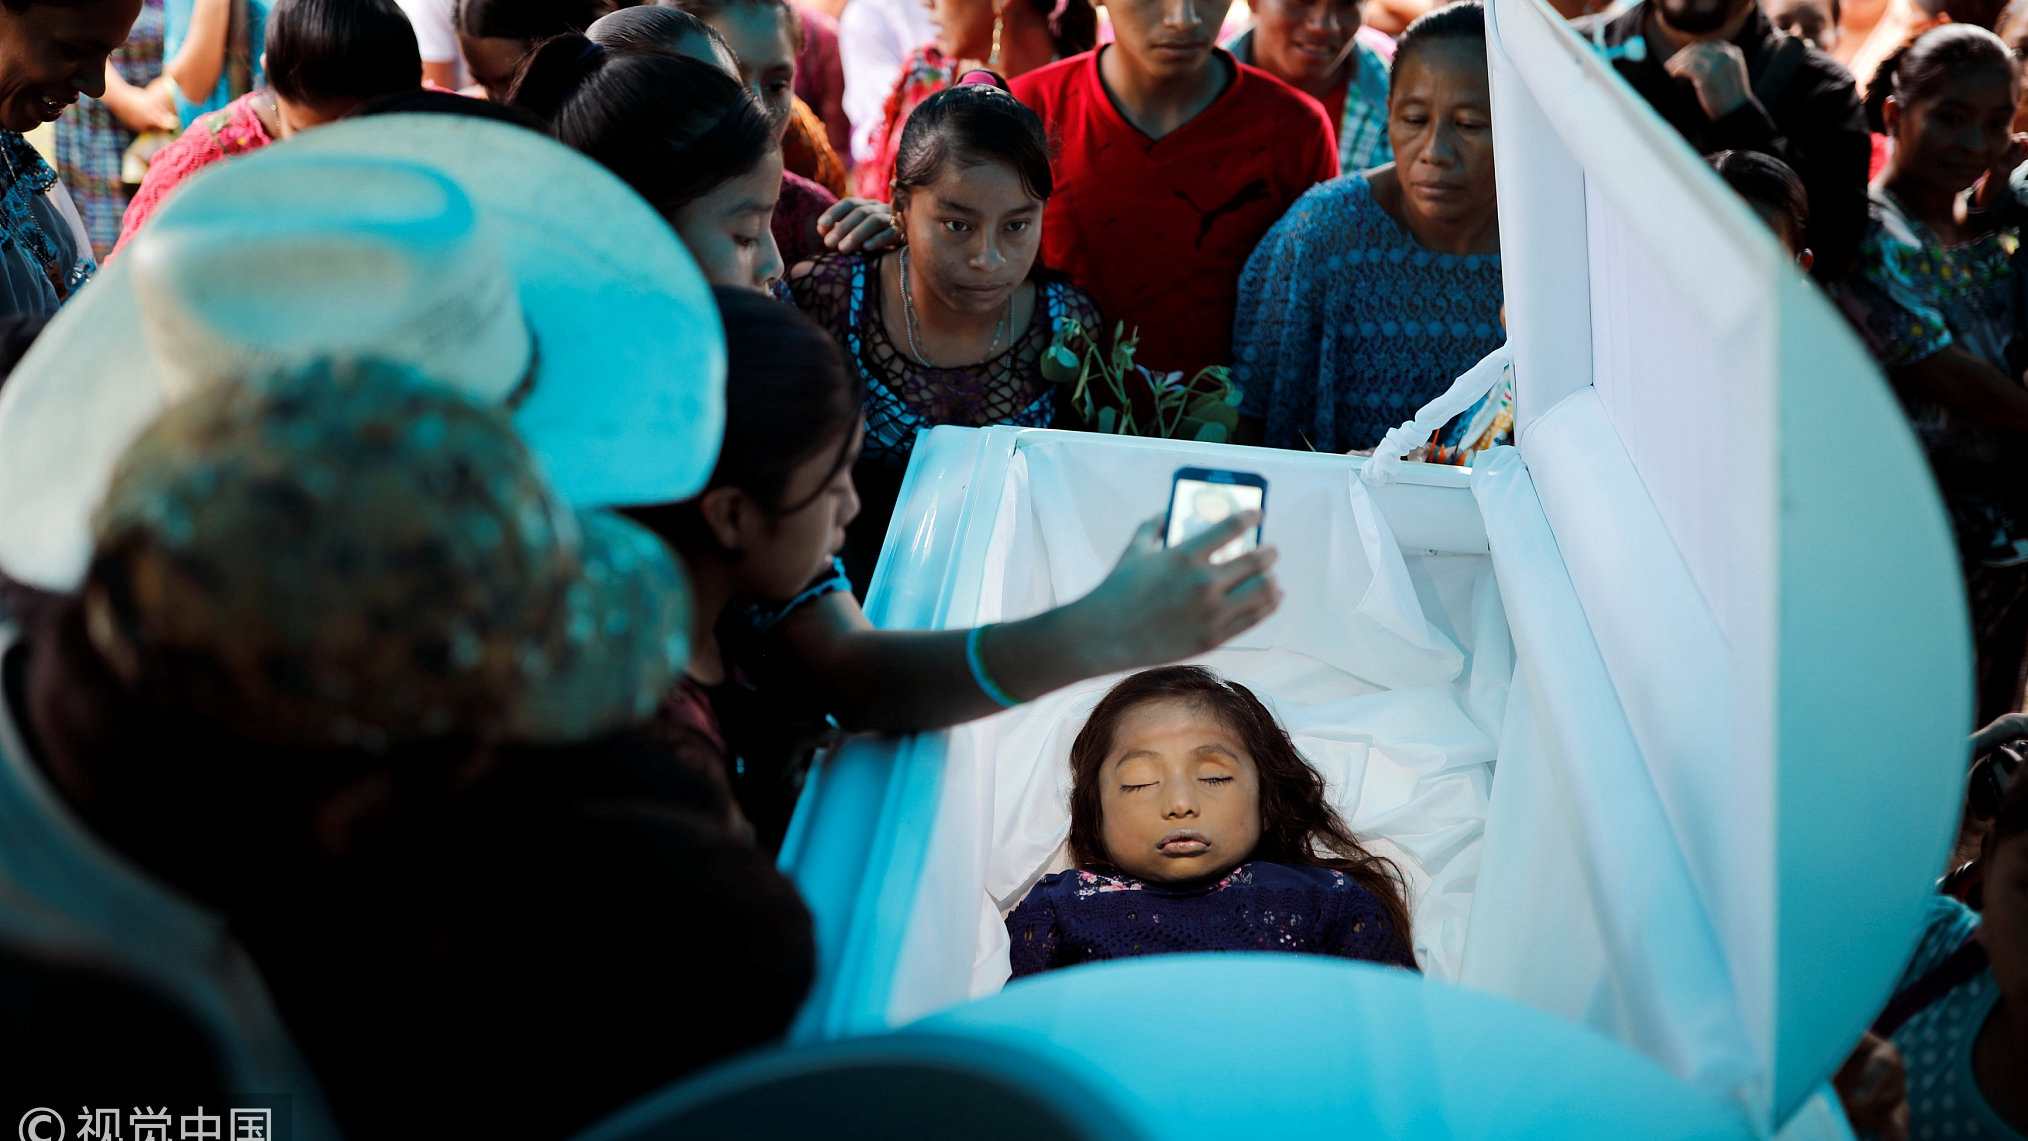 Body of 7-year-old migrant girl returned to Guatemala